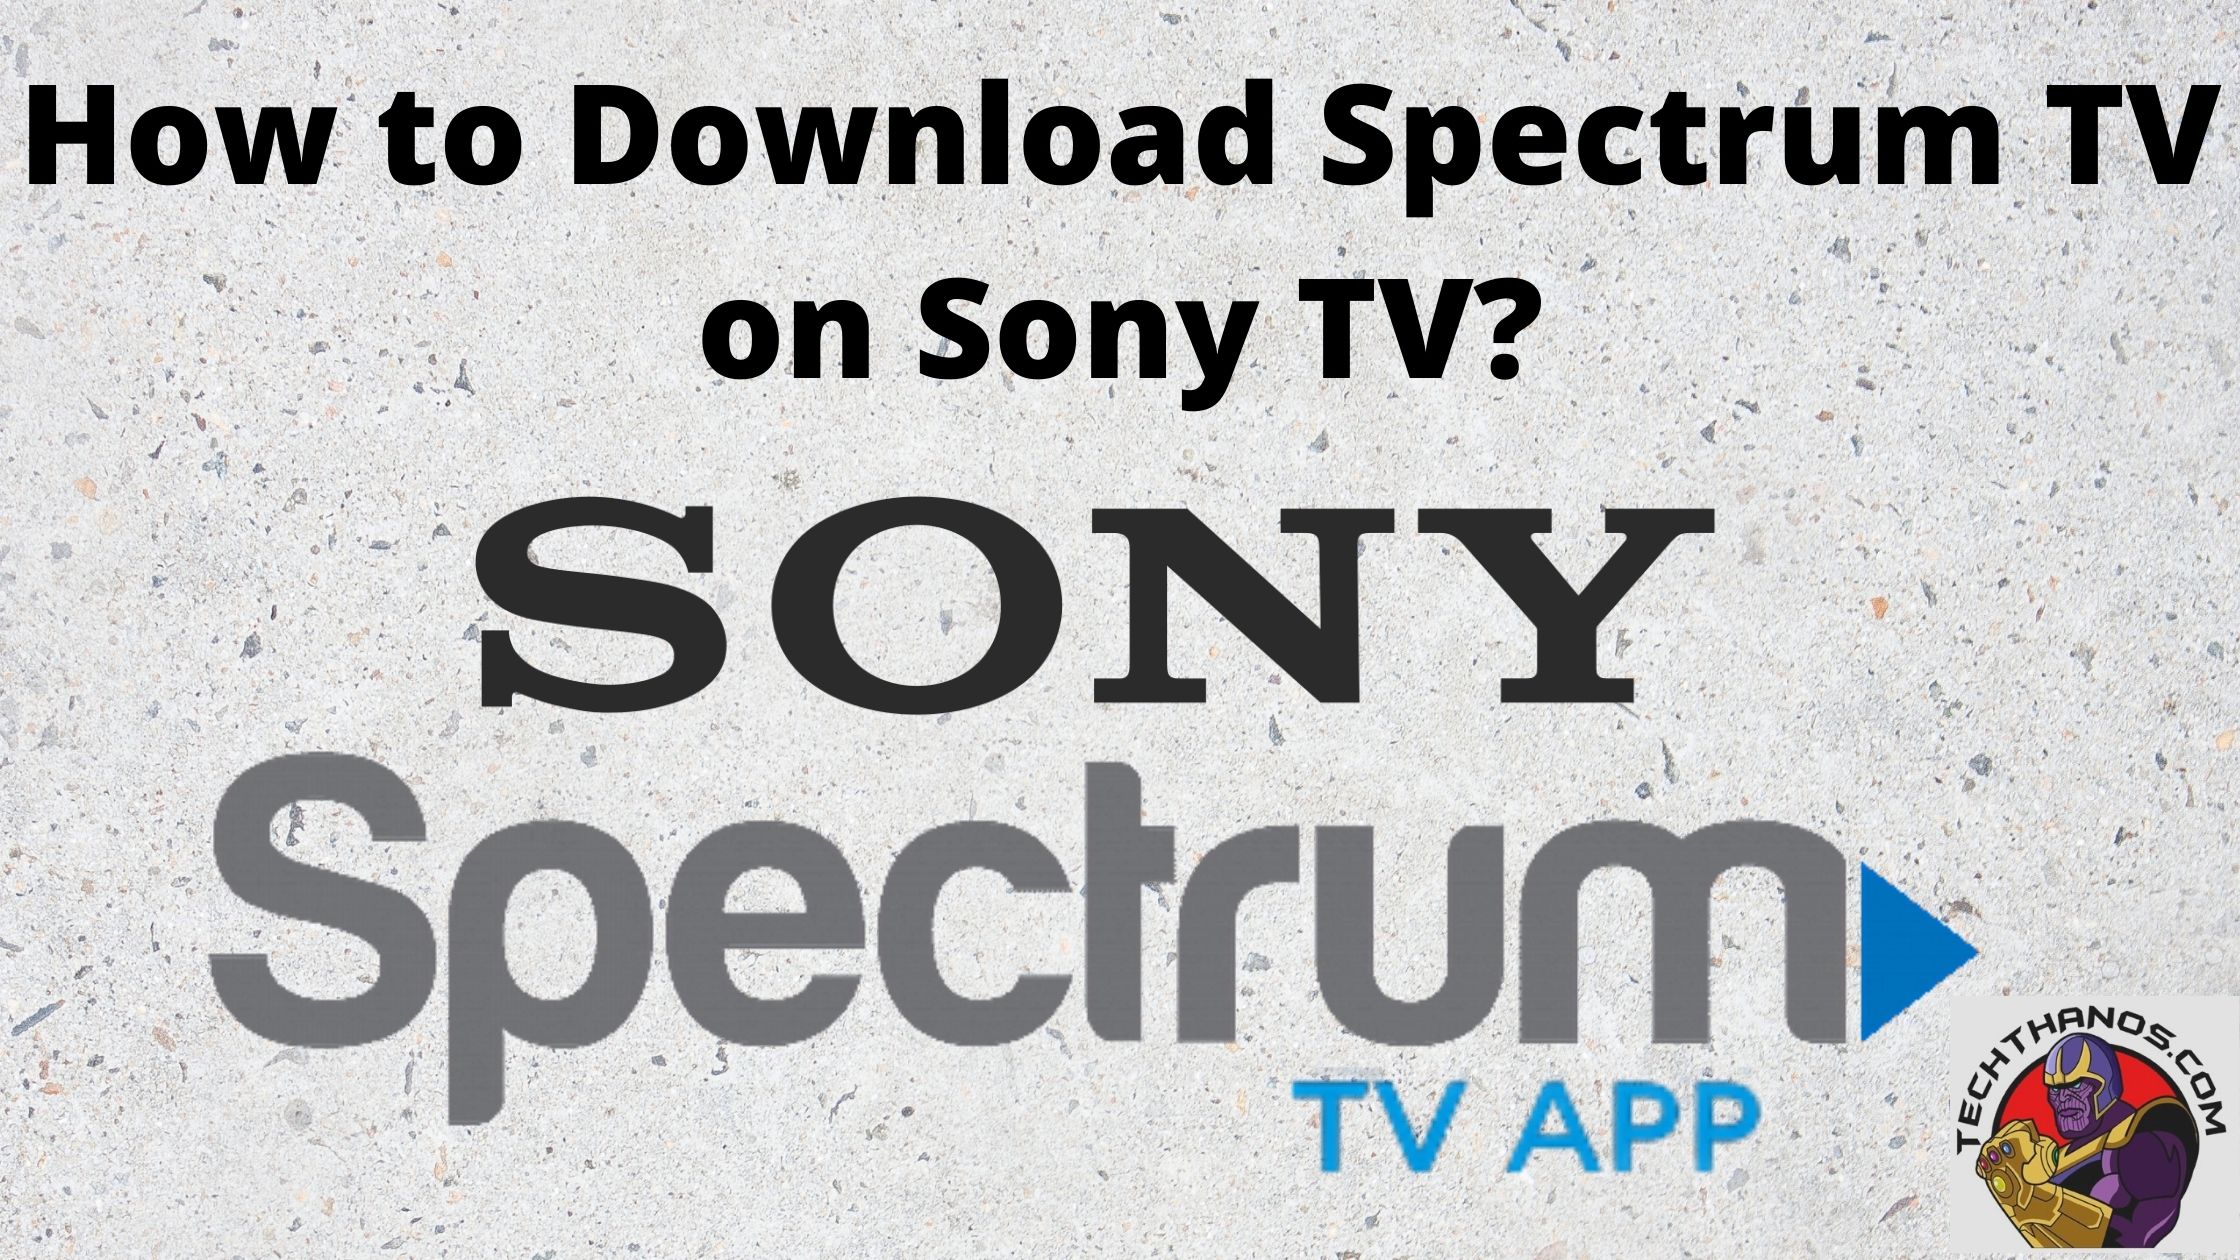 How to Download and Watch Spectrum TV on Sony TV